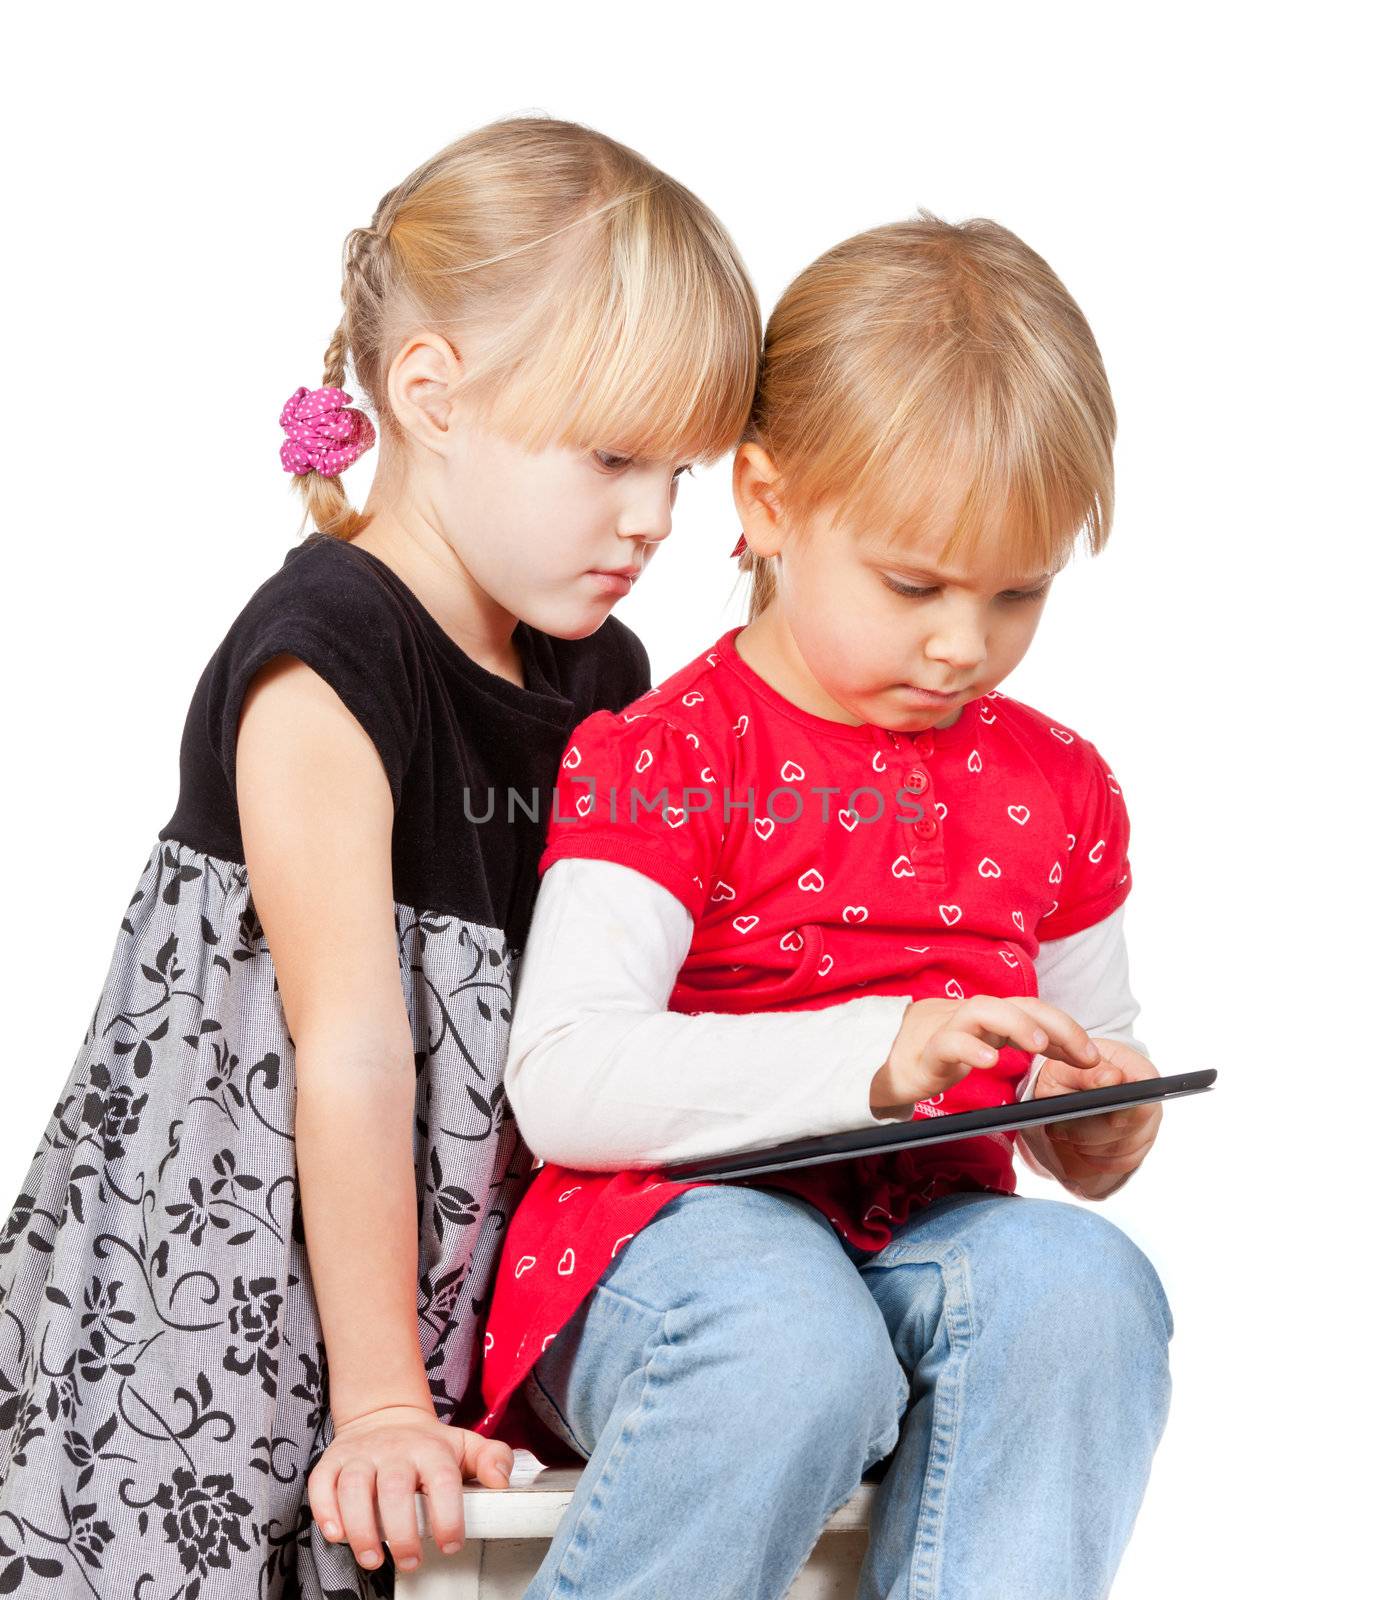 Girls playing with a tablet computer by naumoid